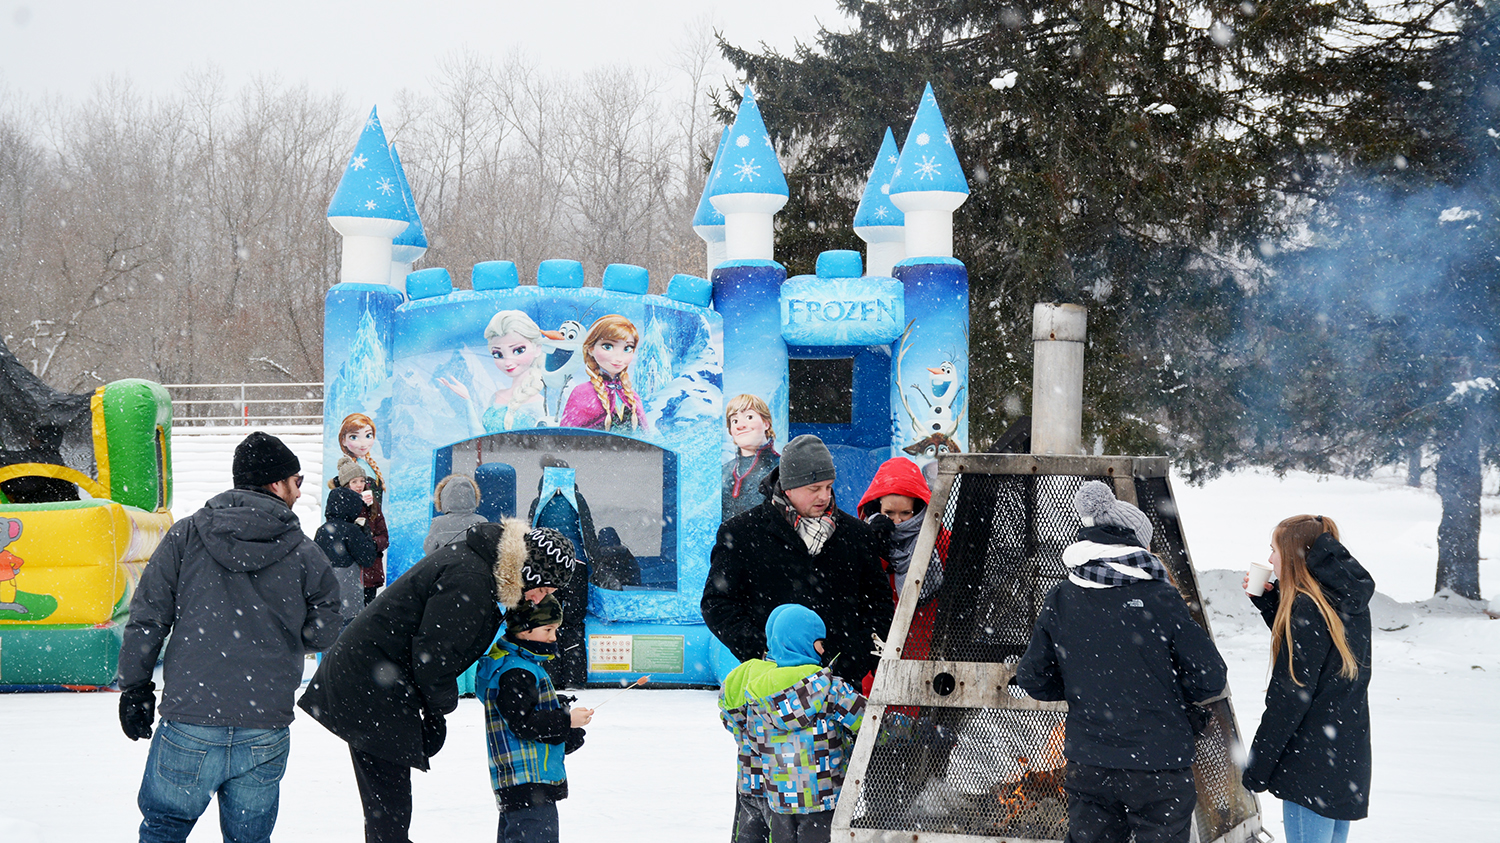 Lennoxville’s annual Winter Fun Day